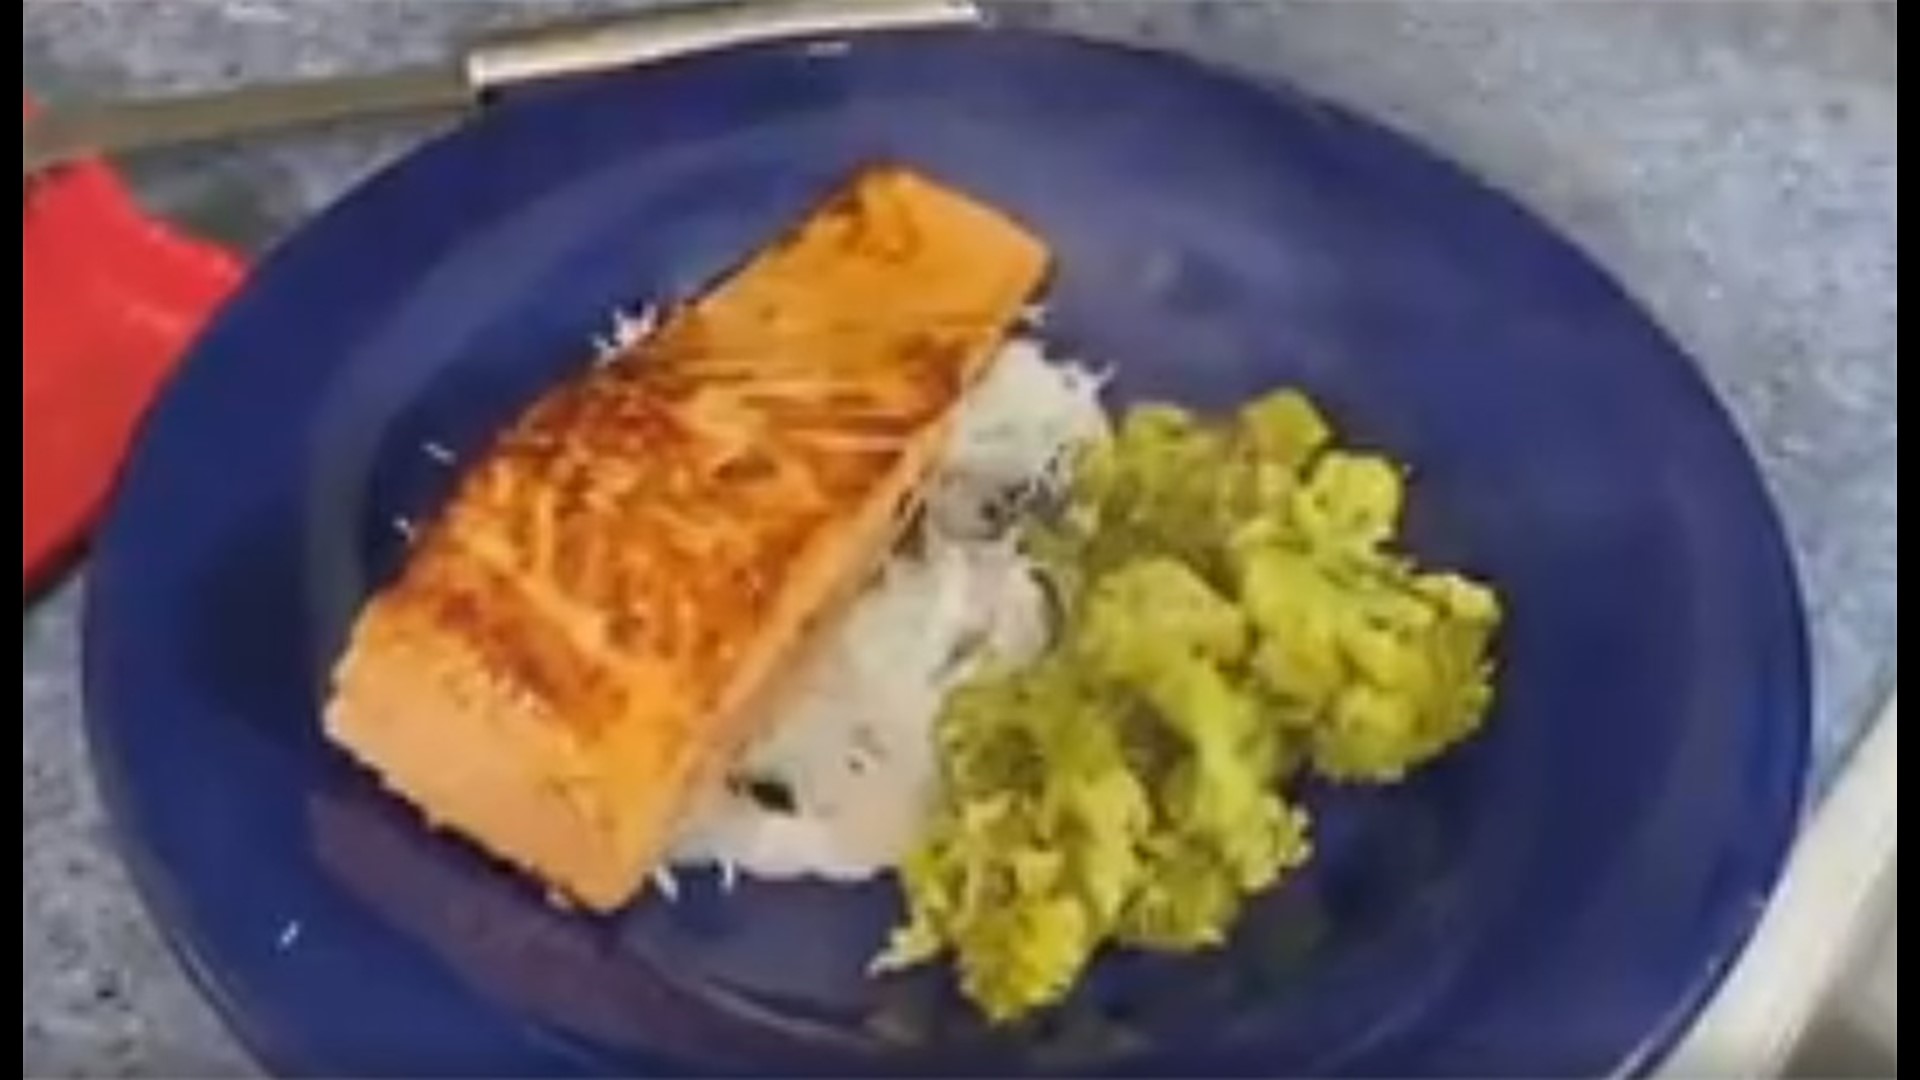 Chef Kevin is making a maple syrup-glazed salmon filet with broccoli.